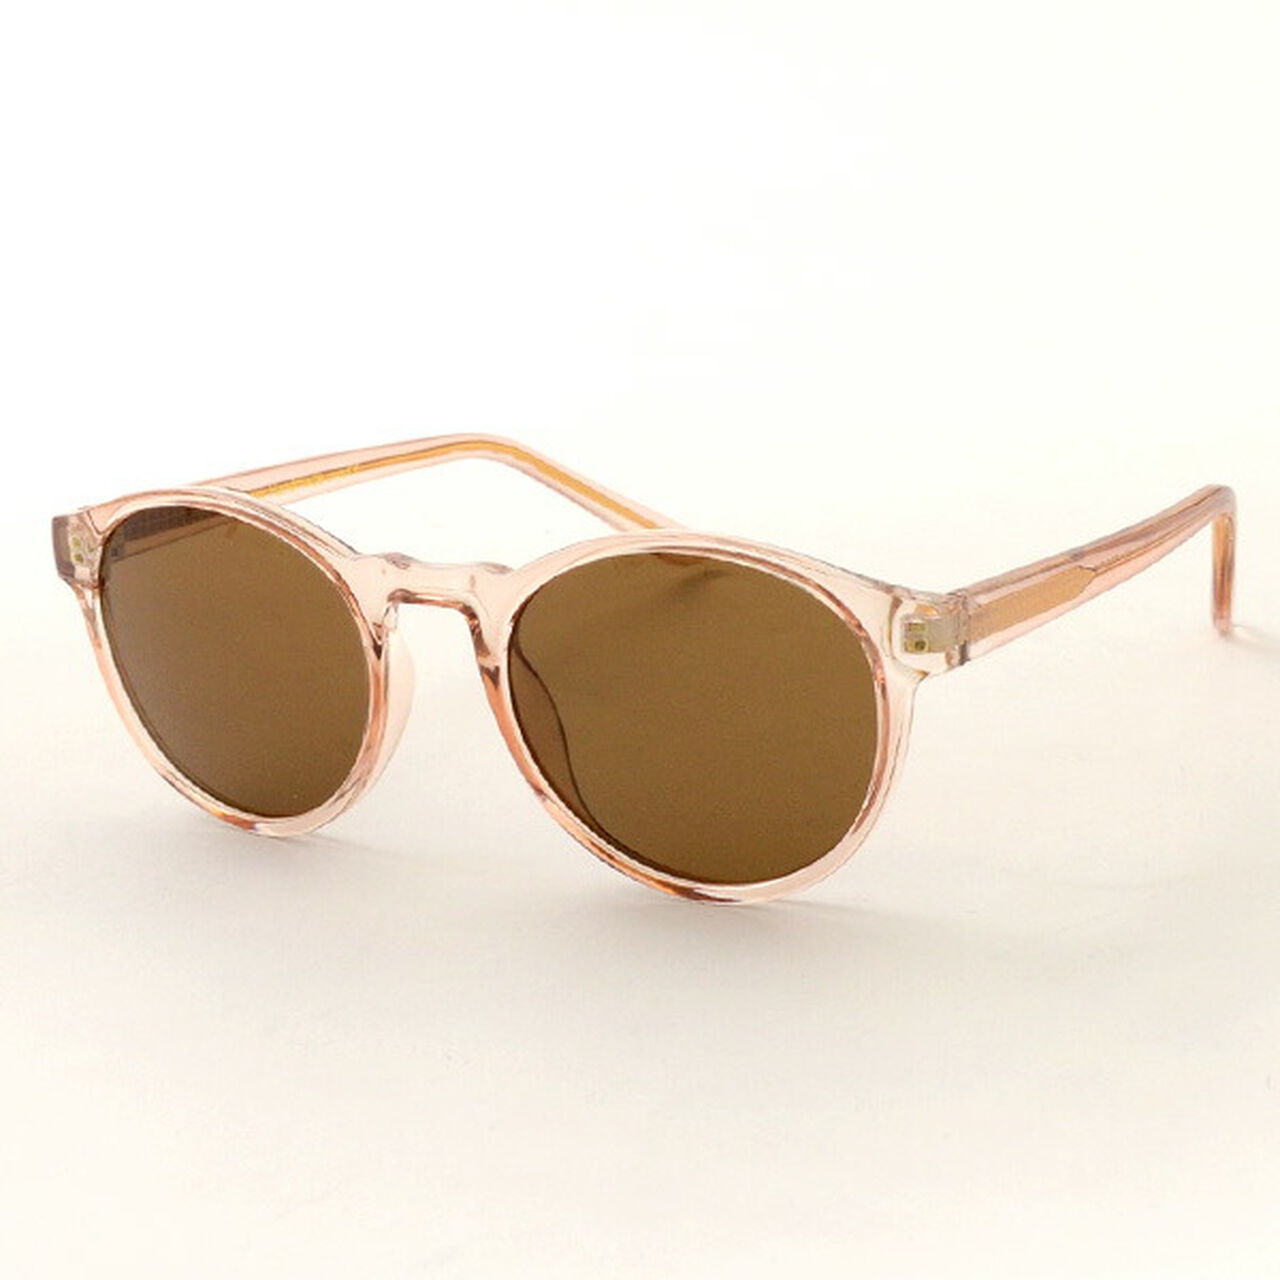 Marvin Cell Frame Sunglasses,Champagne, large image number 0